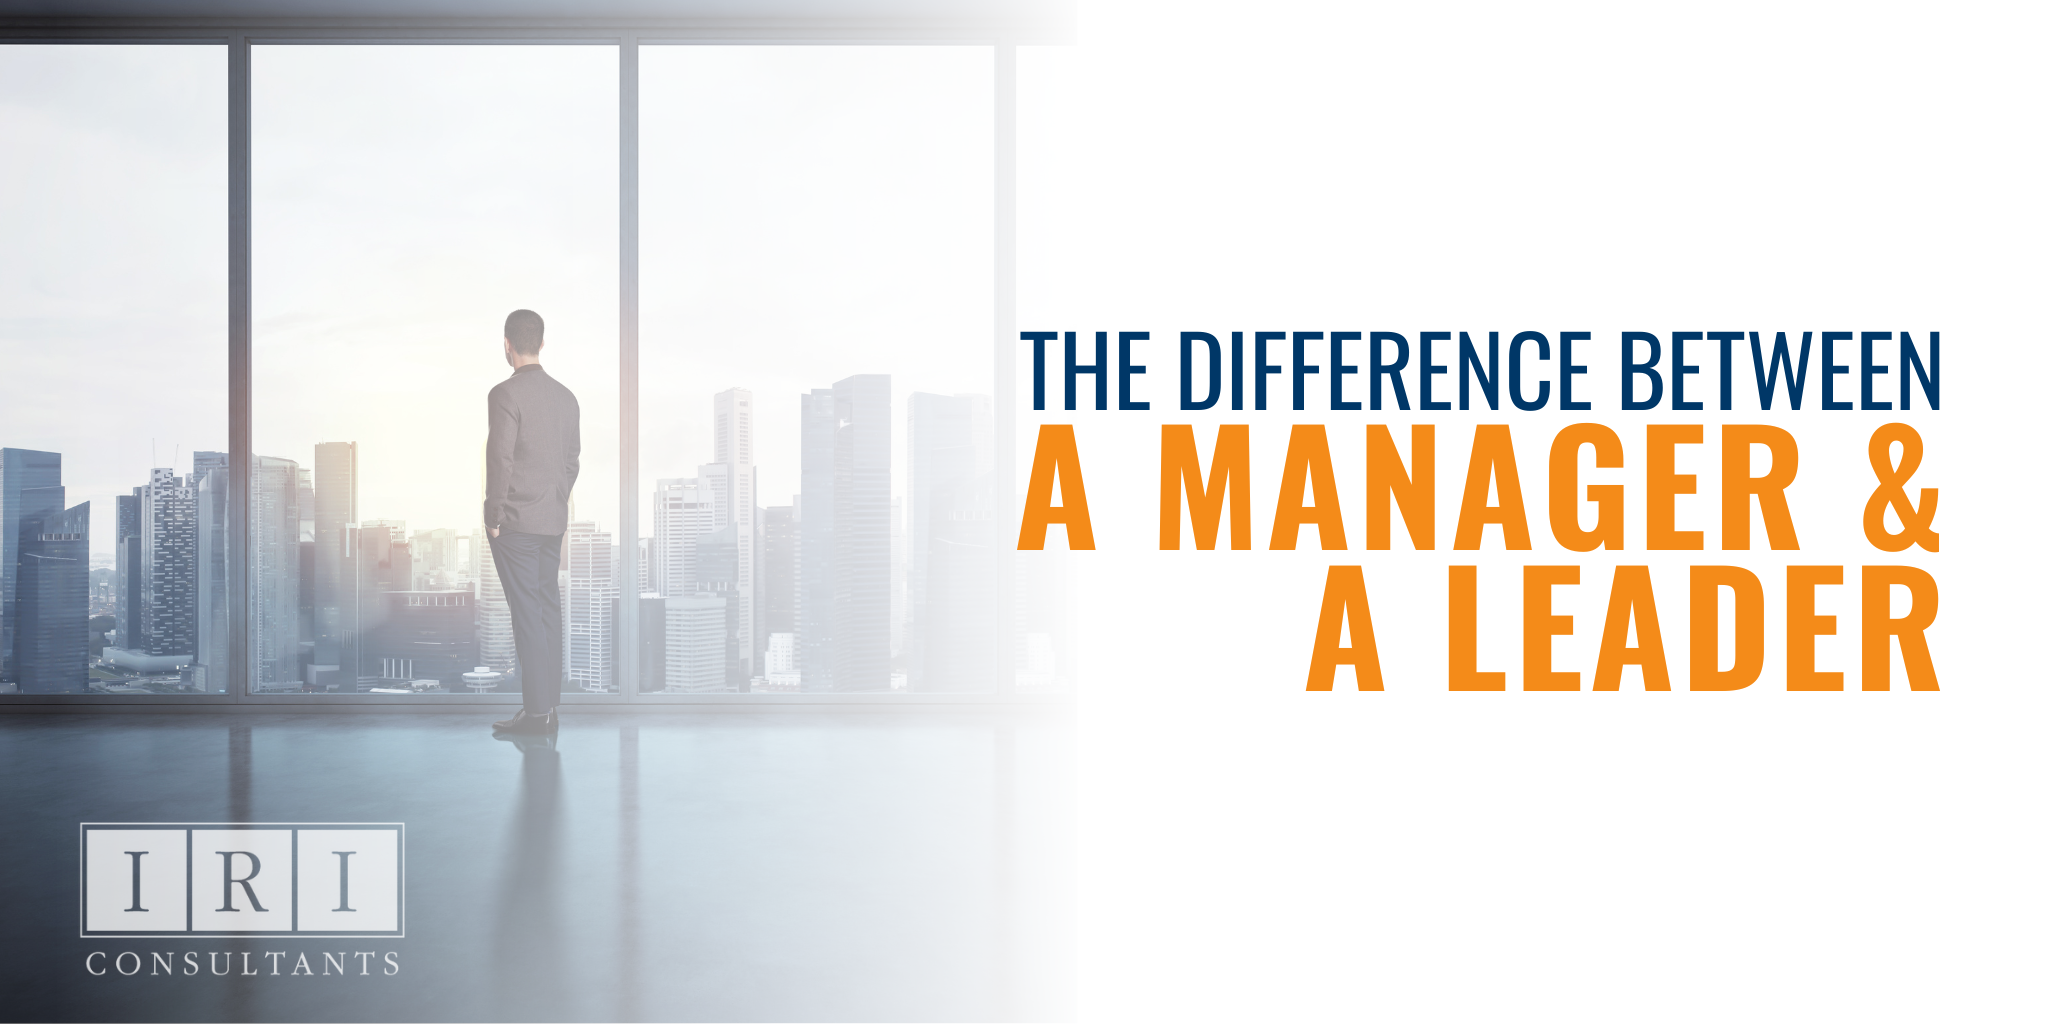 The difference between a manager and a leader